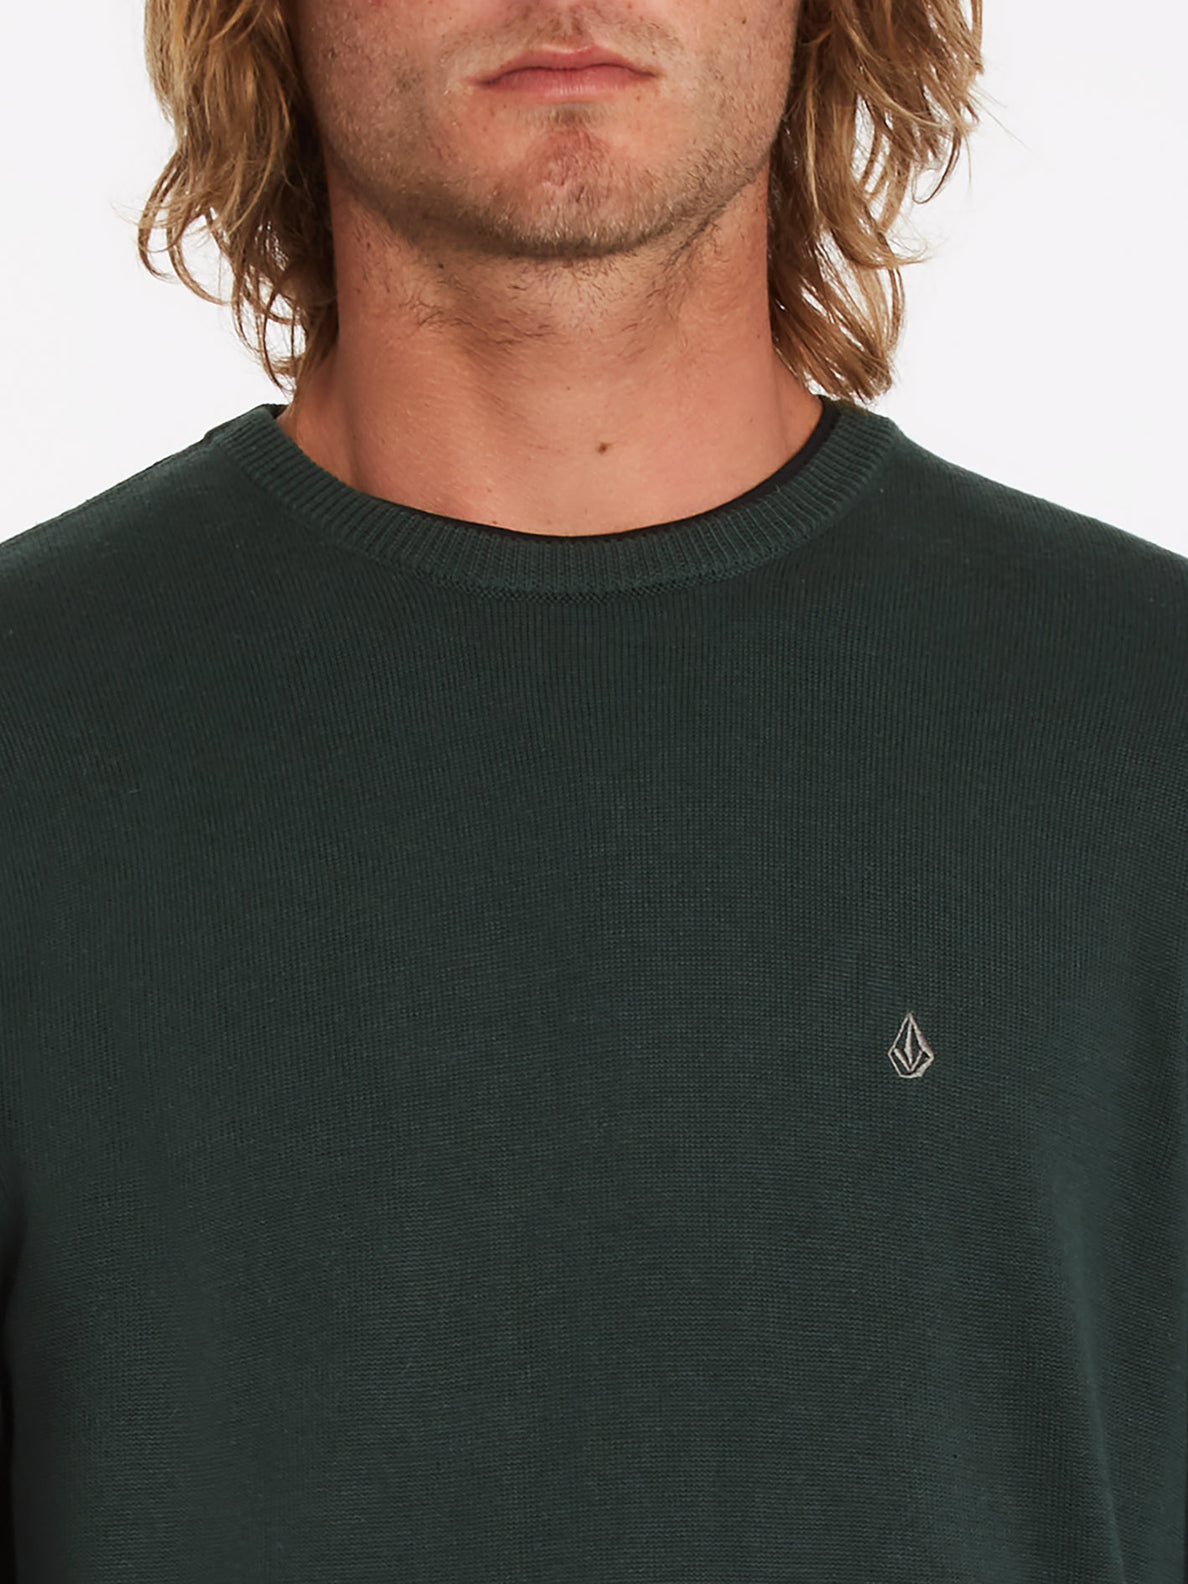 Maglione Uperstand - VERDE CEDRO (A0731900_CDG) [4]